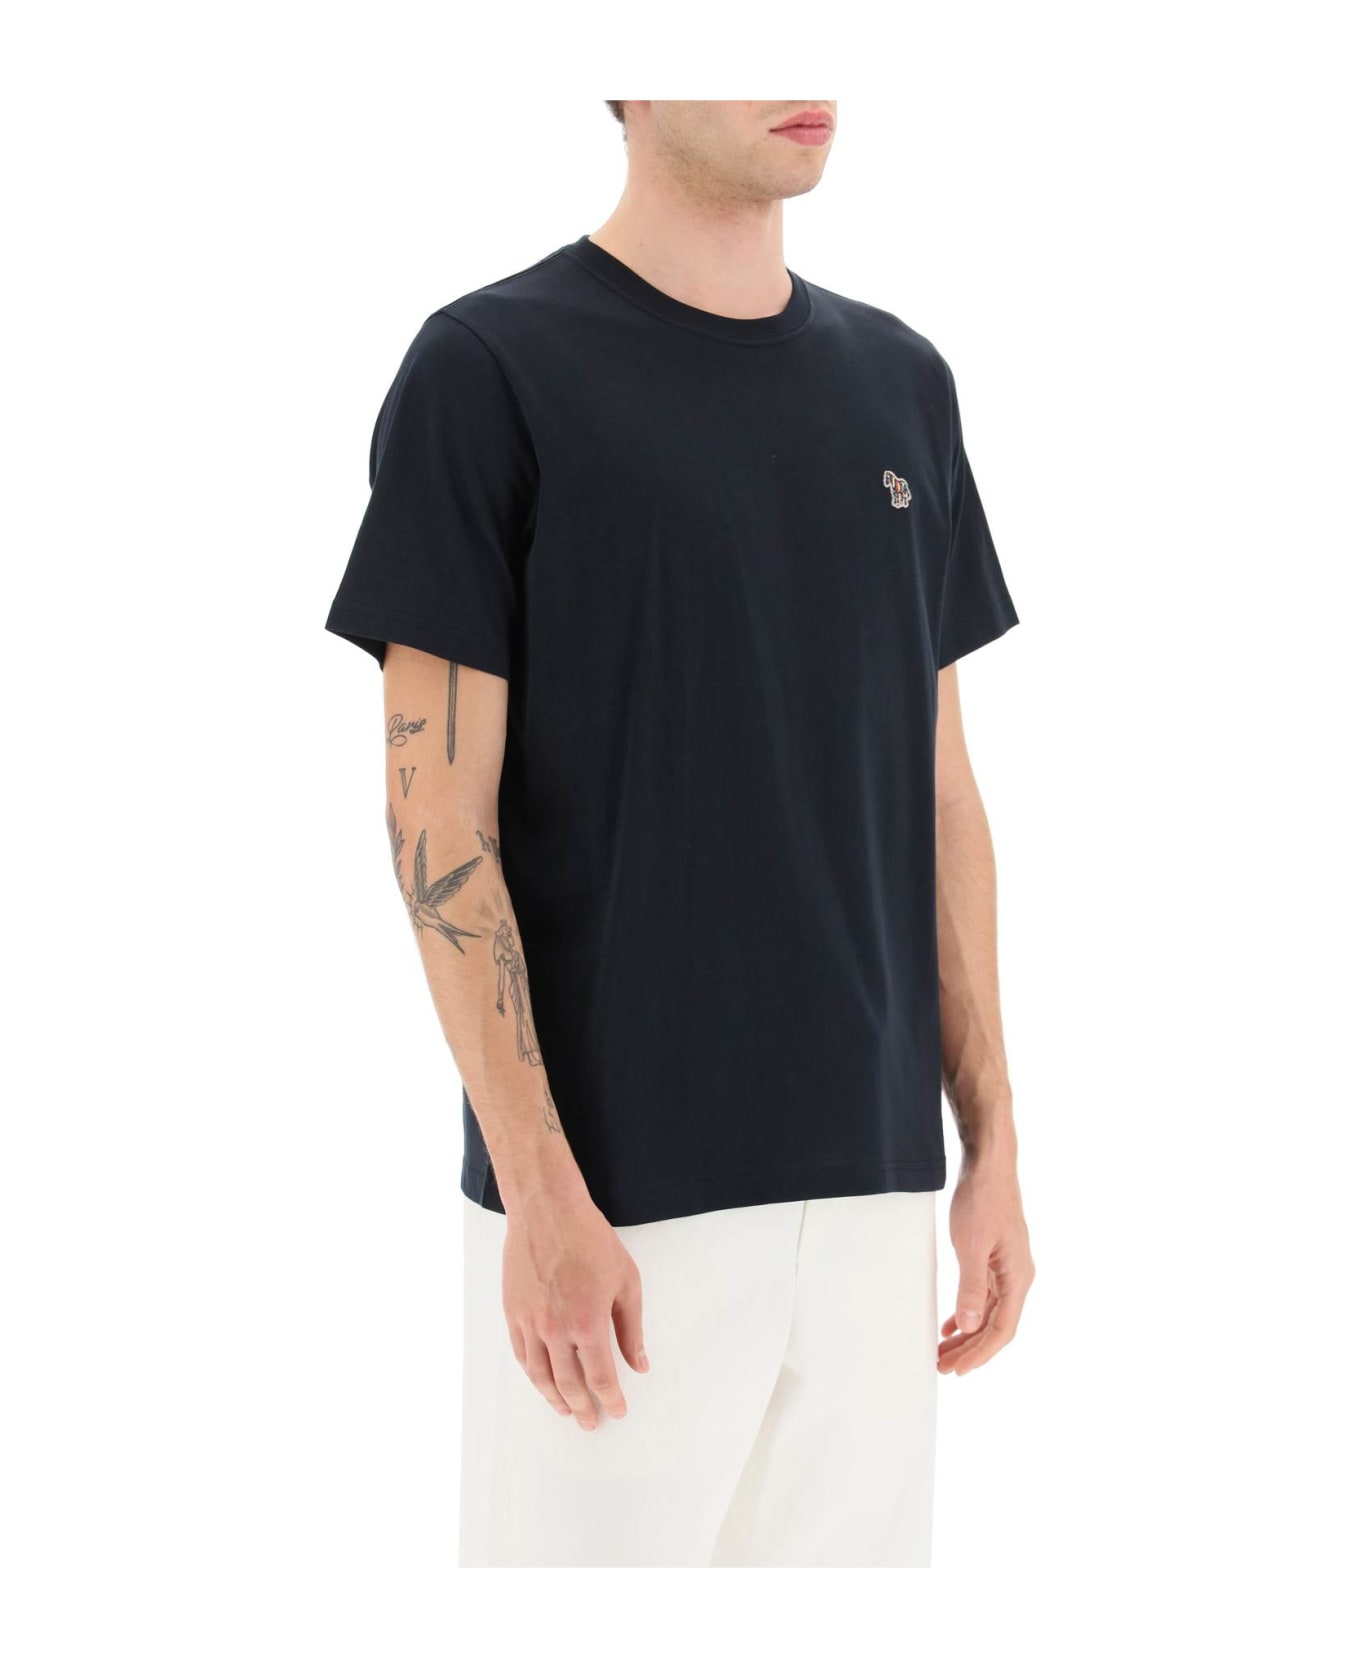 PS by Paul Smith Organic Cotton T-shirt - VERY DARK NAVY (Blue) シャツ